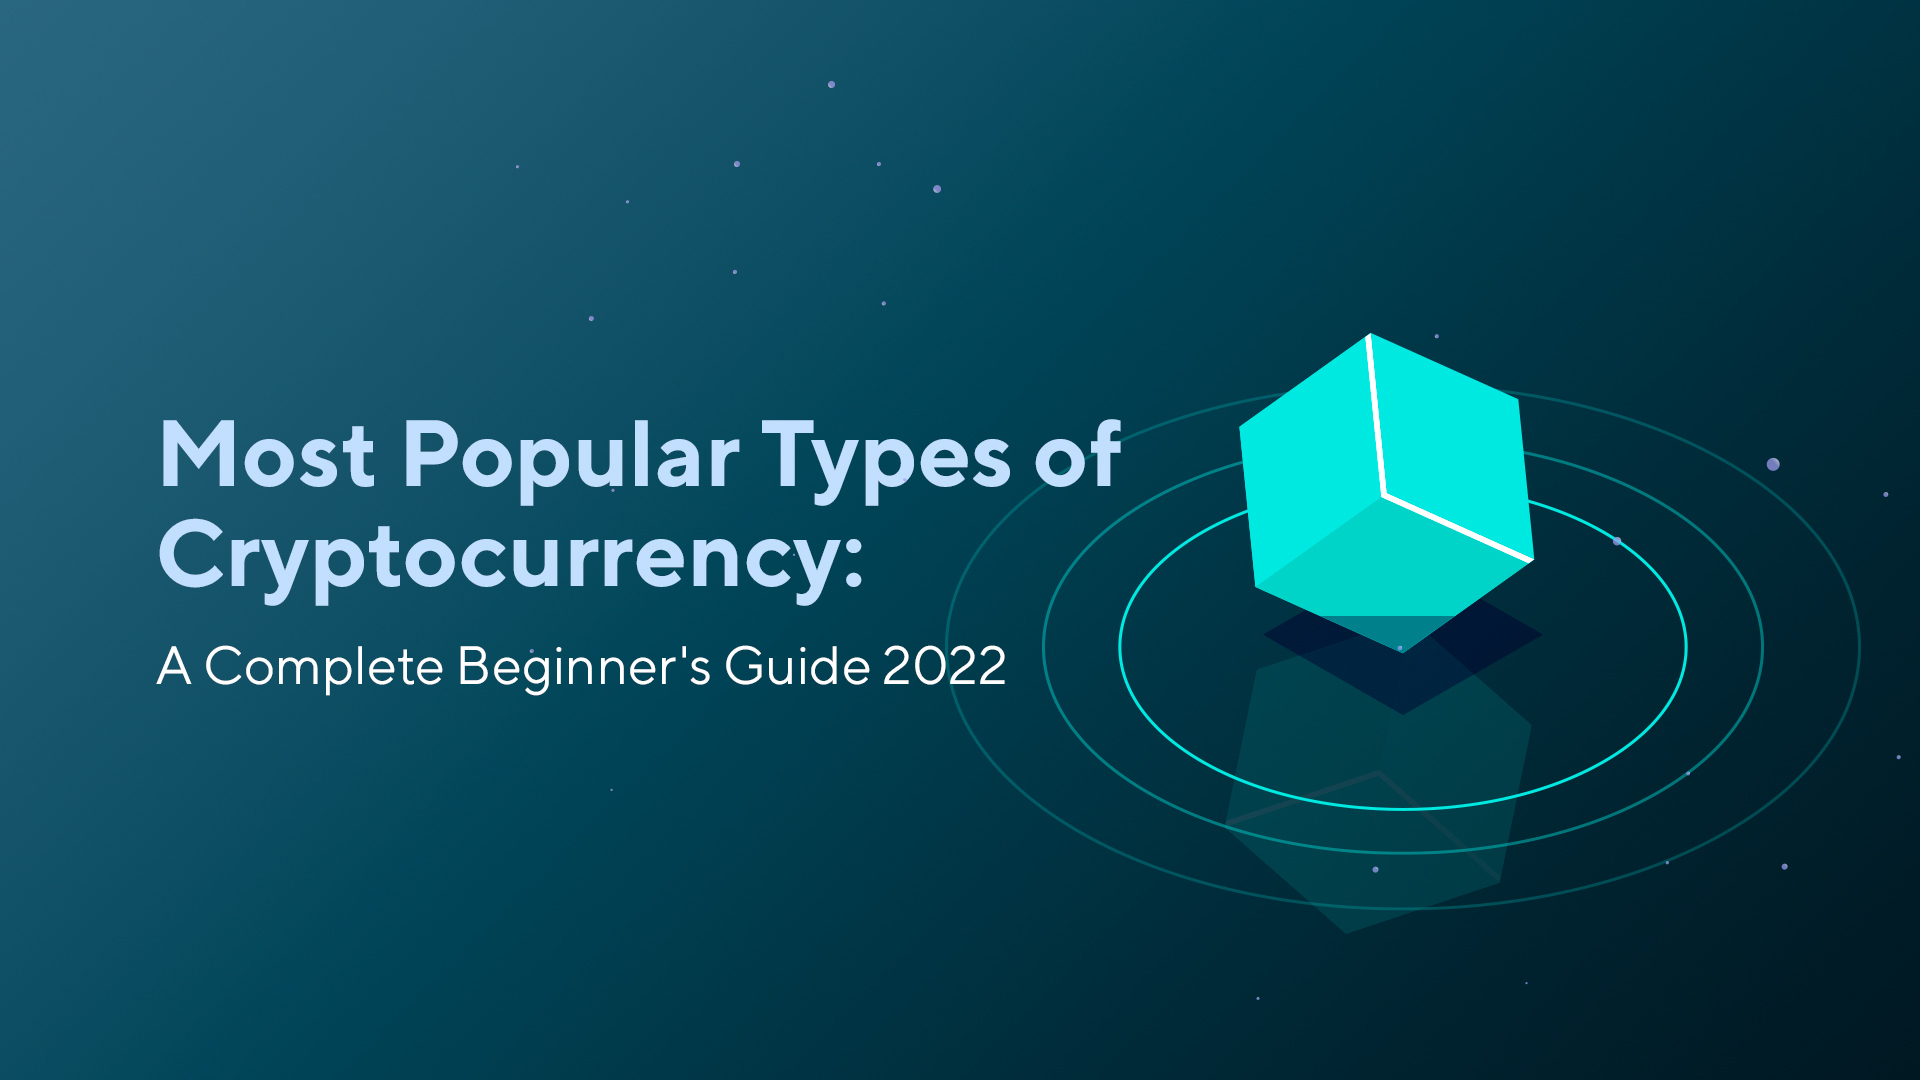 Most Popular Types of Cryptocurrency: A Complete Beginner’s Guide 2022